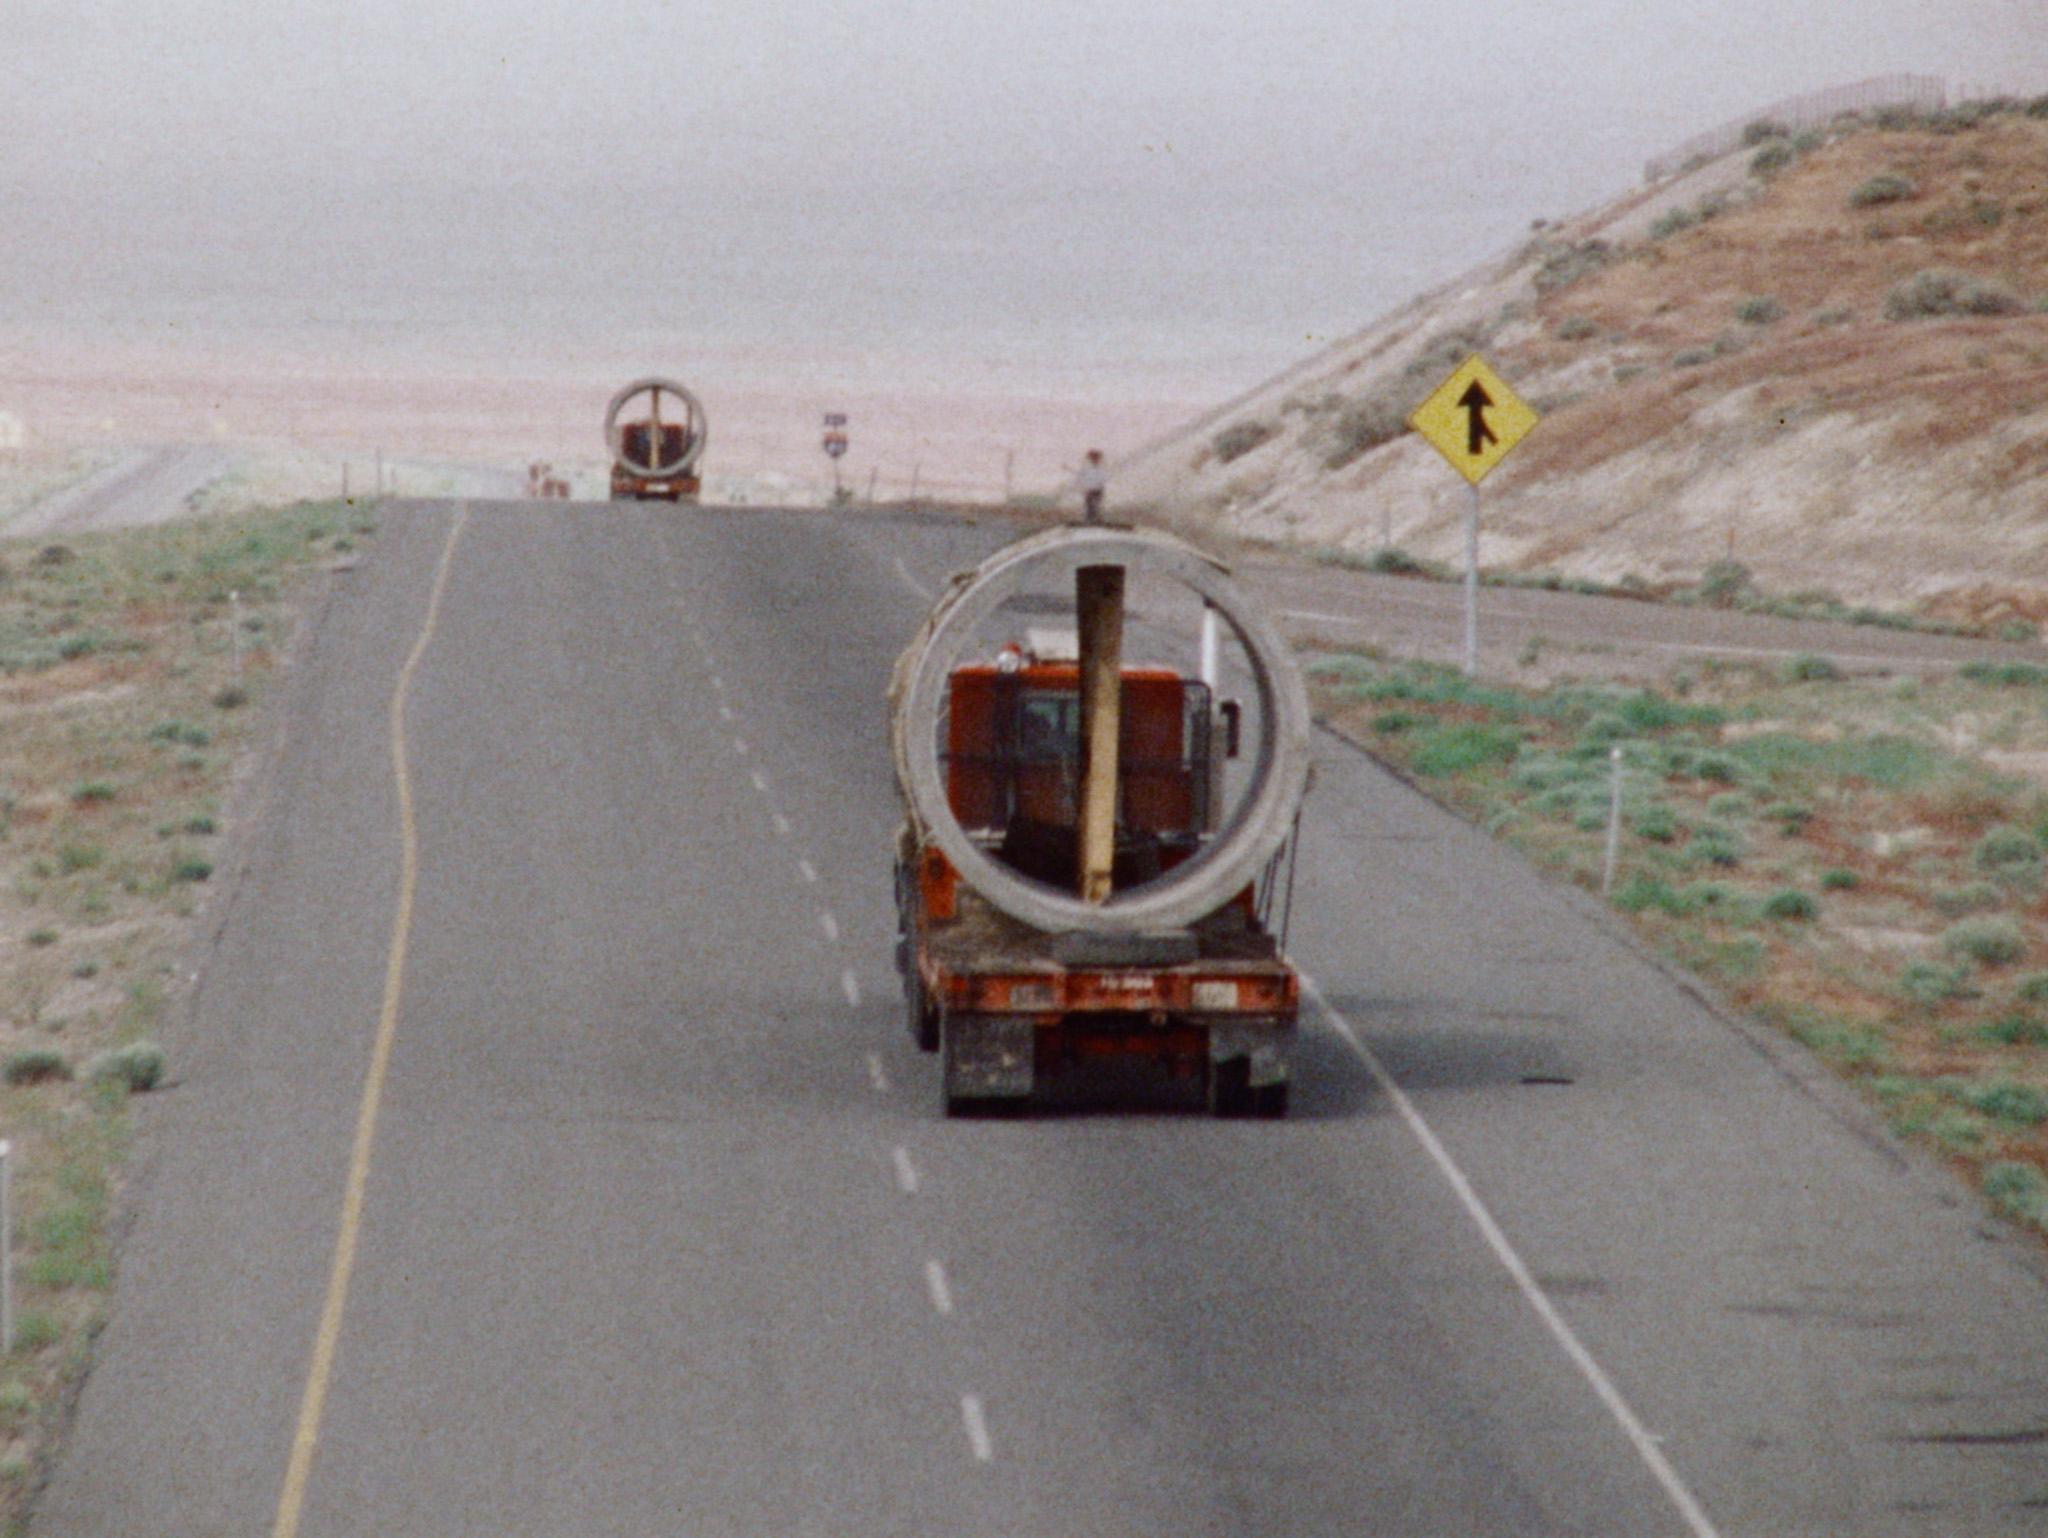 Still from Nancy Holt's film Sun Tunnels showing the construction of her earthwork